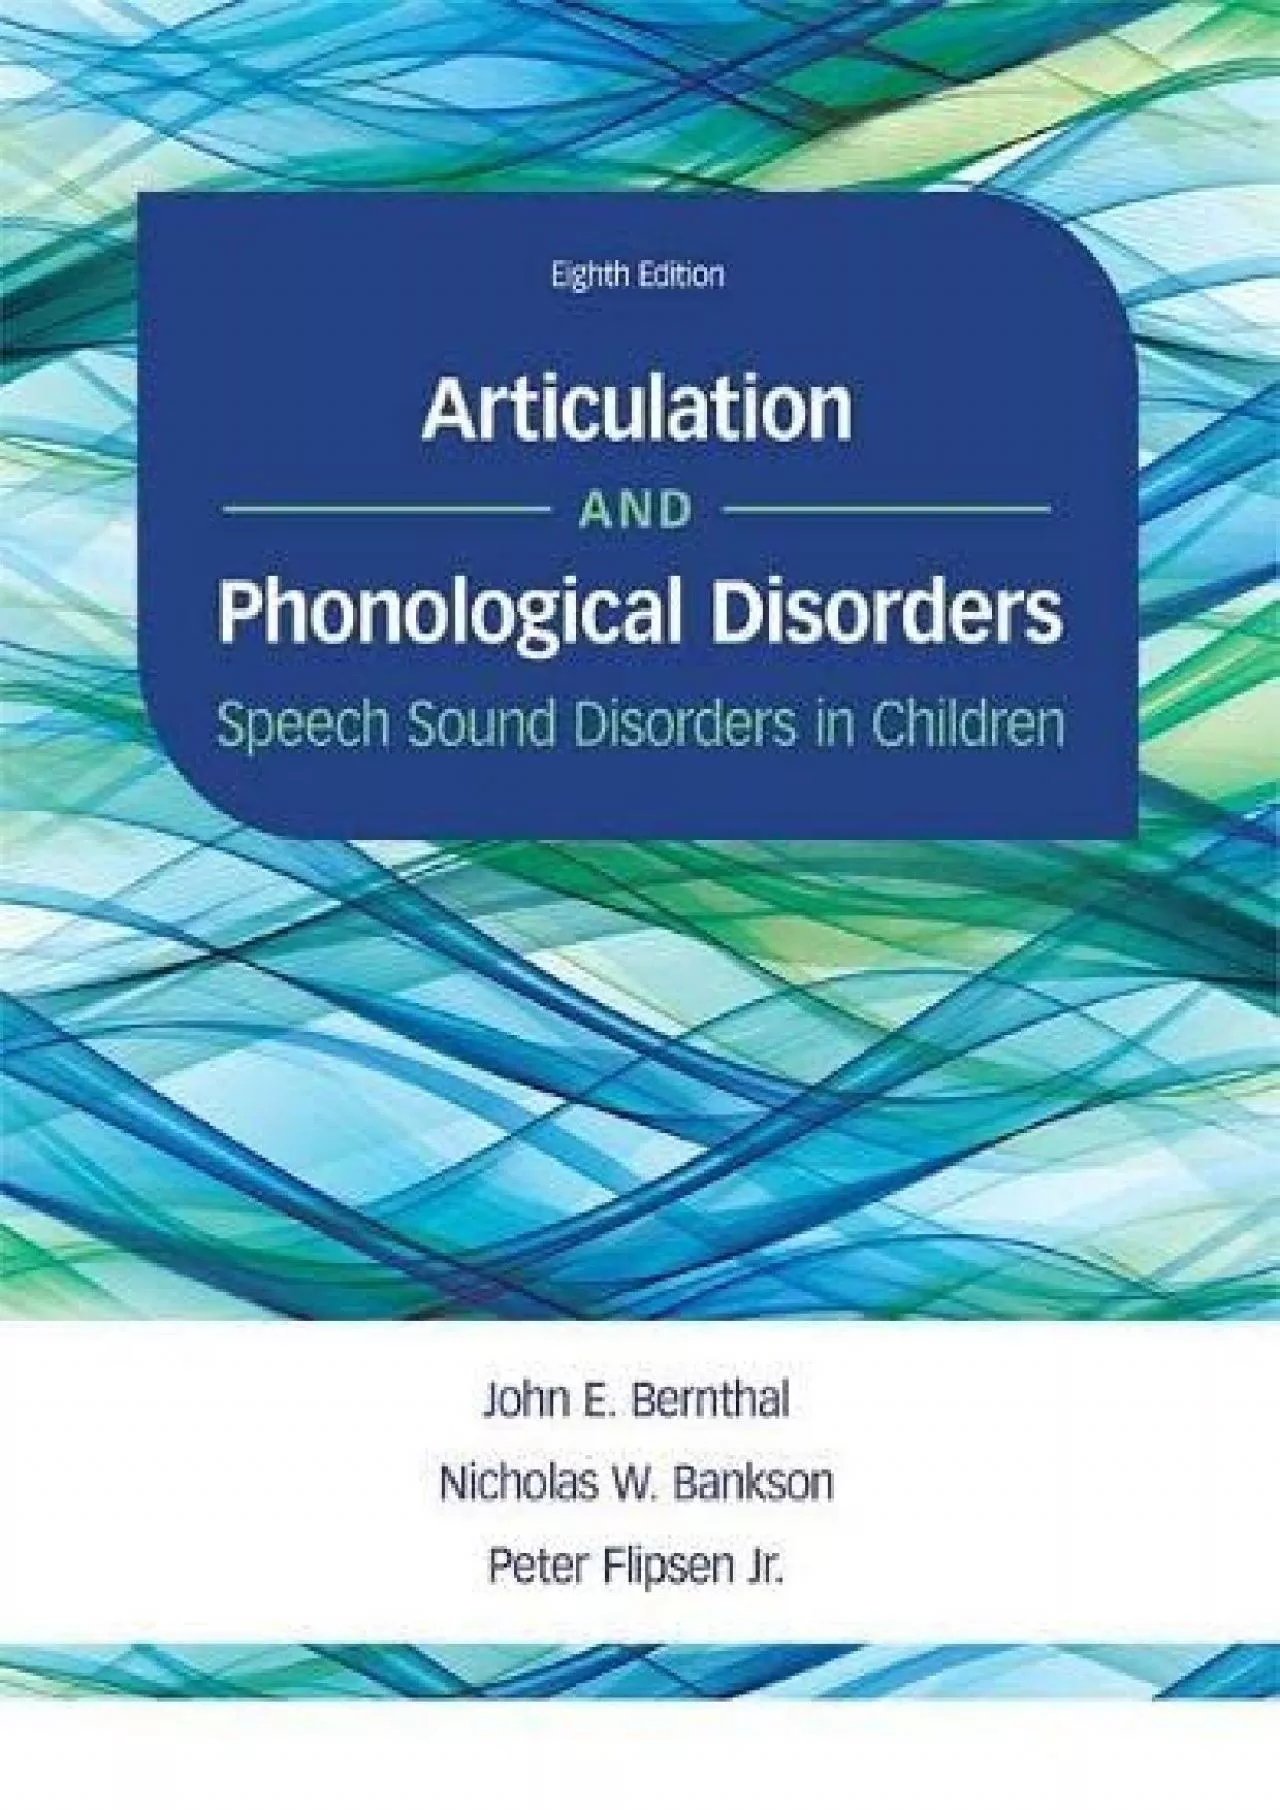 (DOWNLOAD)-Articulation and Phonological Disorders: Speech Sound Disorders in Children